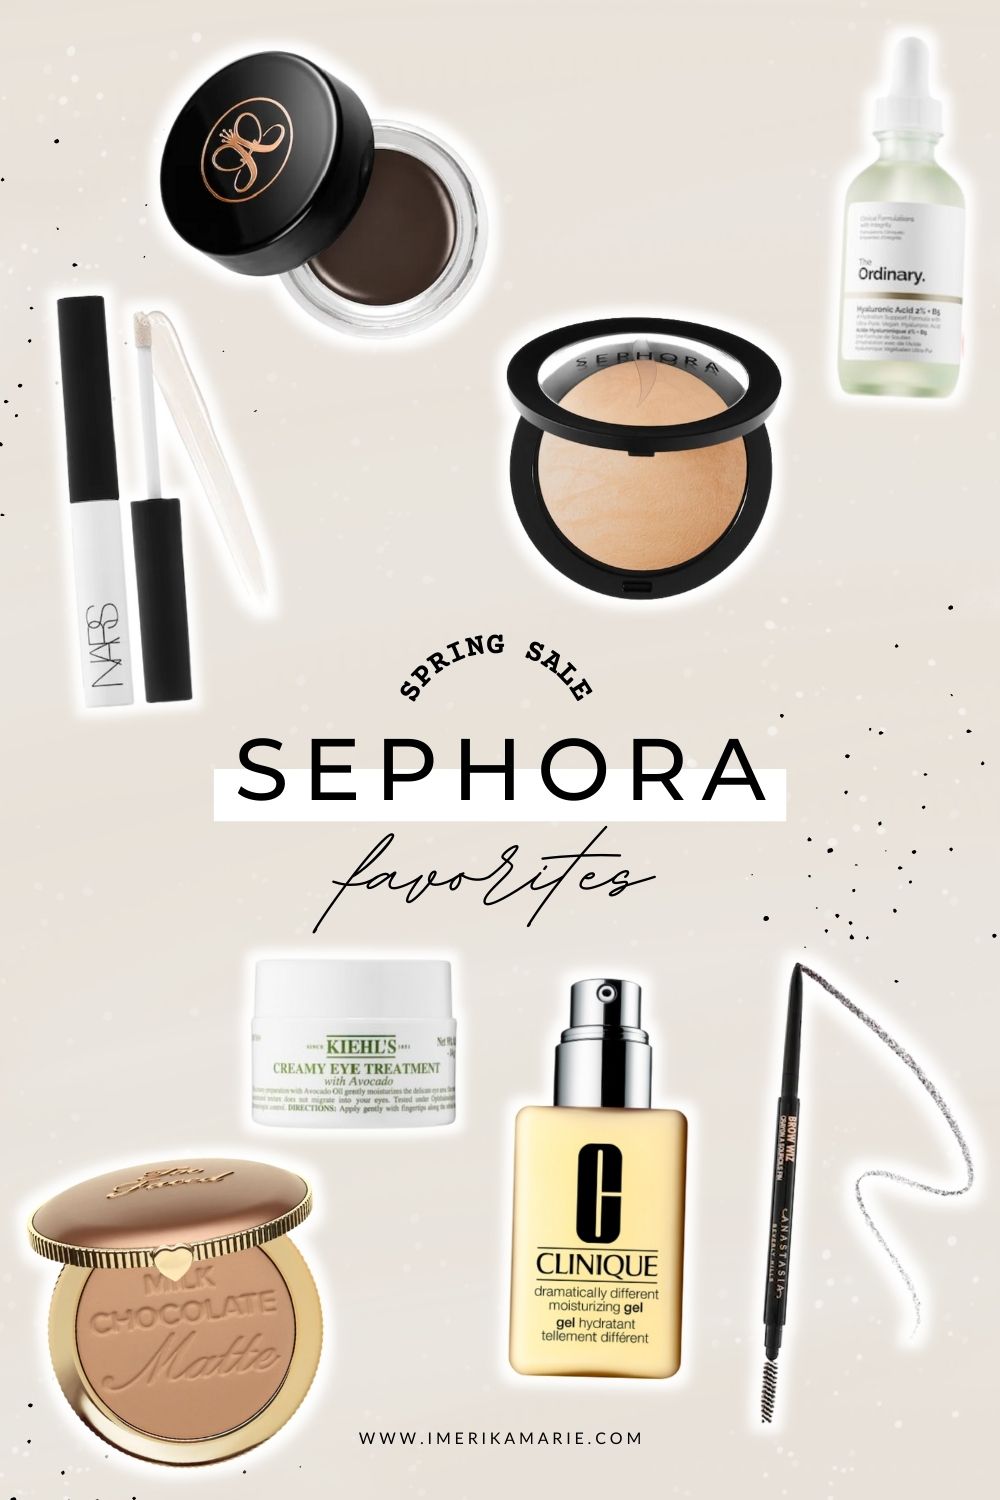 Sephora Spring Sale The Best Products at Sephora